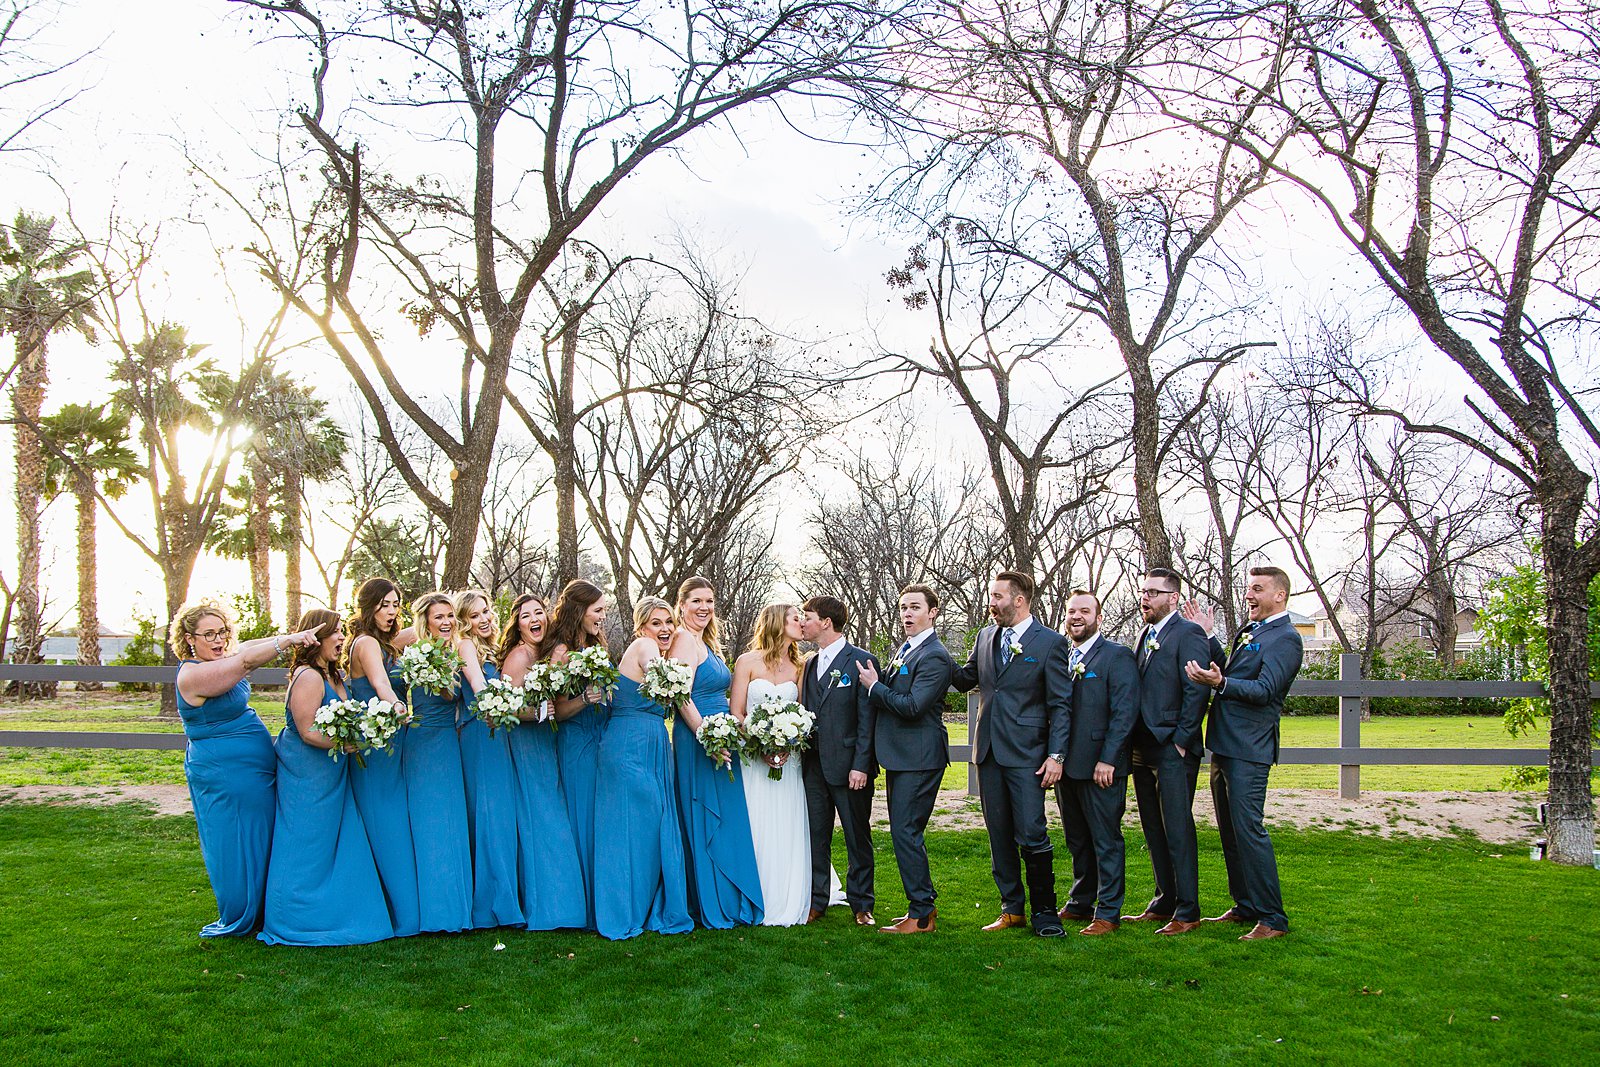 Bridal party having fun together at Venue At The Grove weding by Arizona wedding photographer PMA Photography.